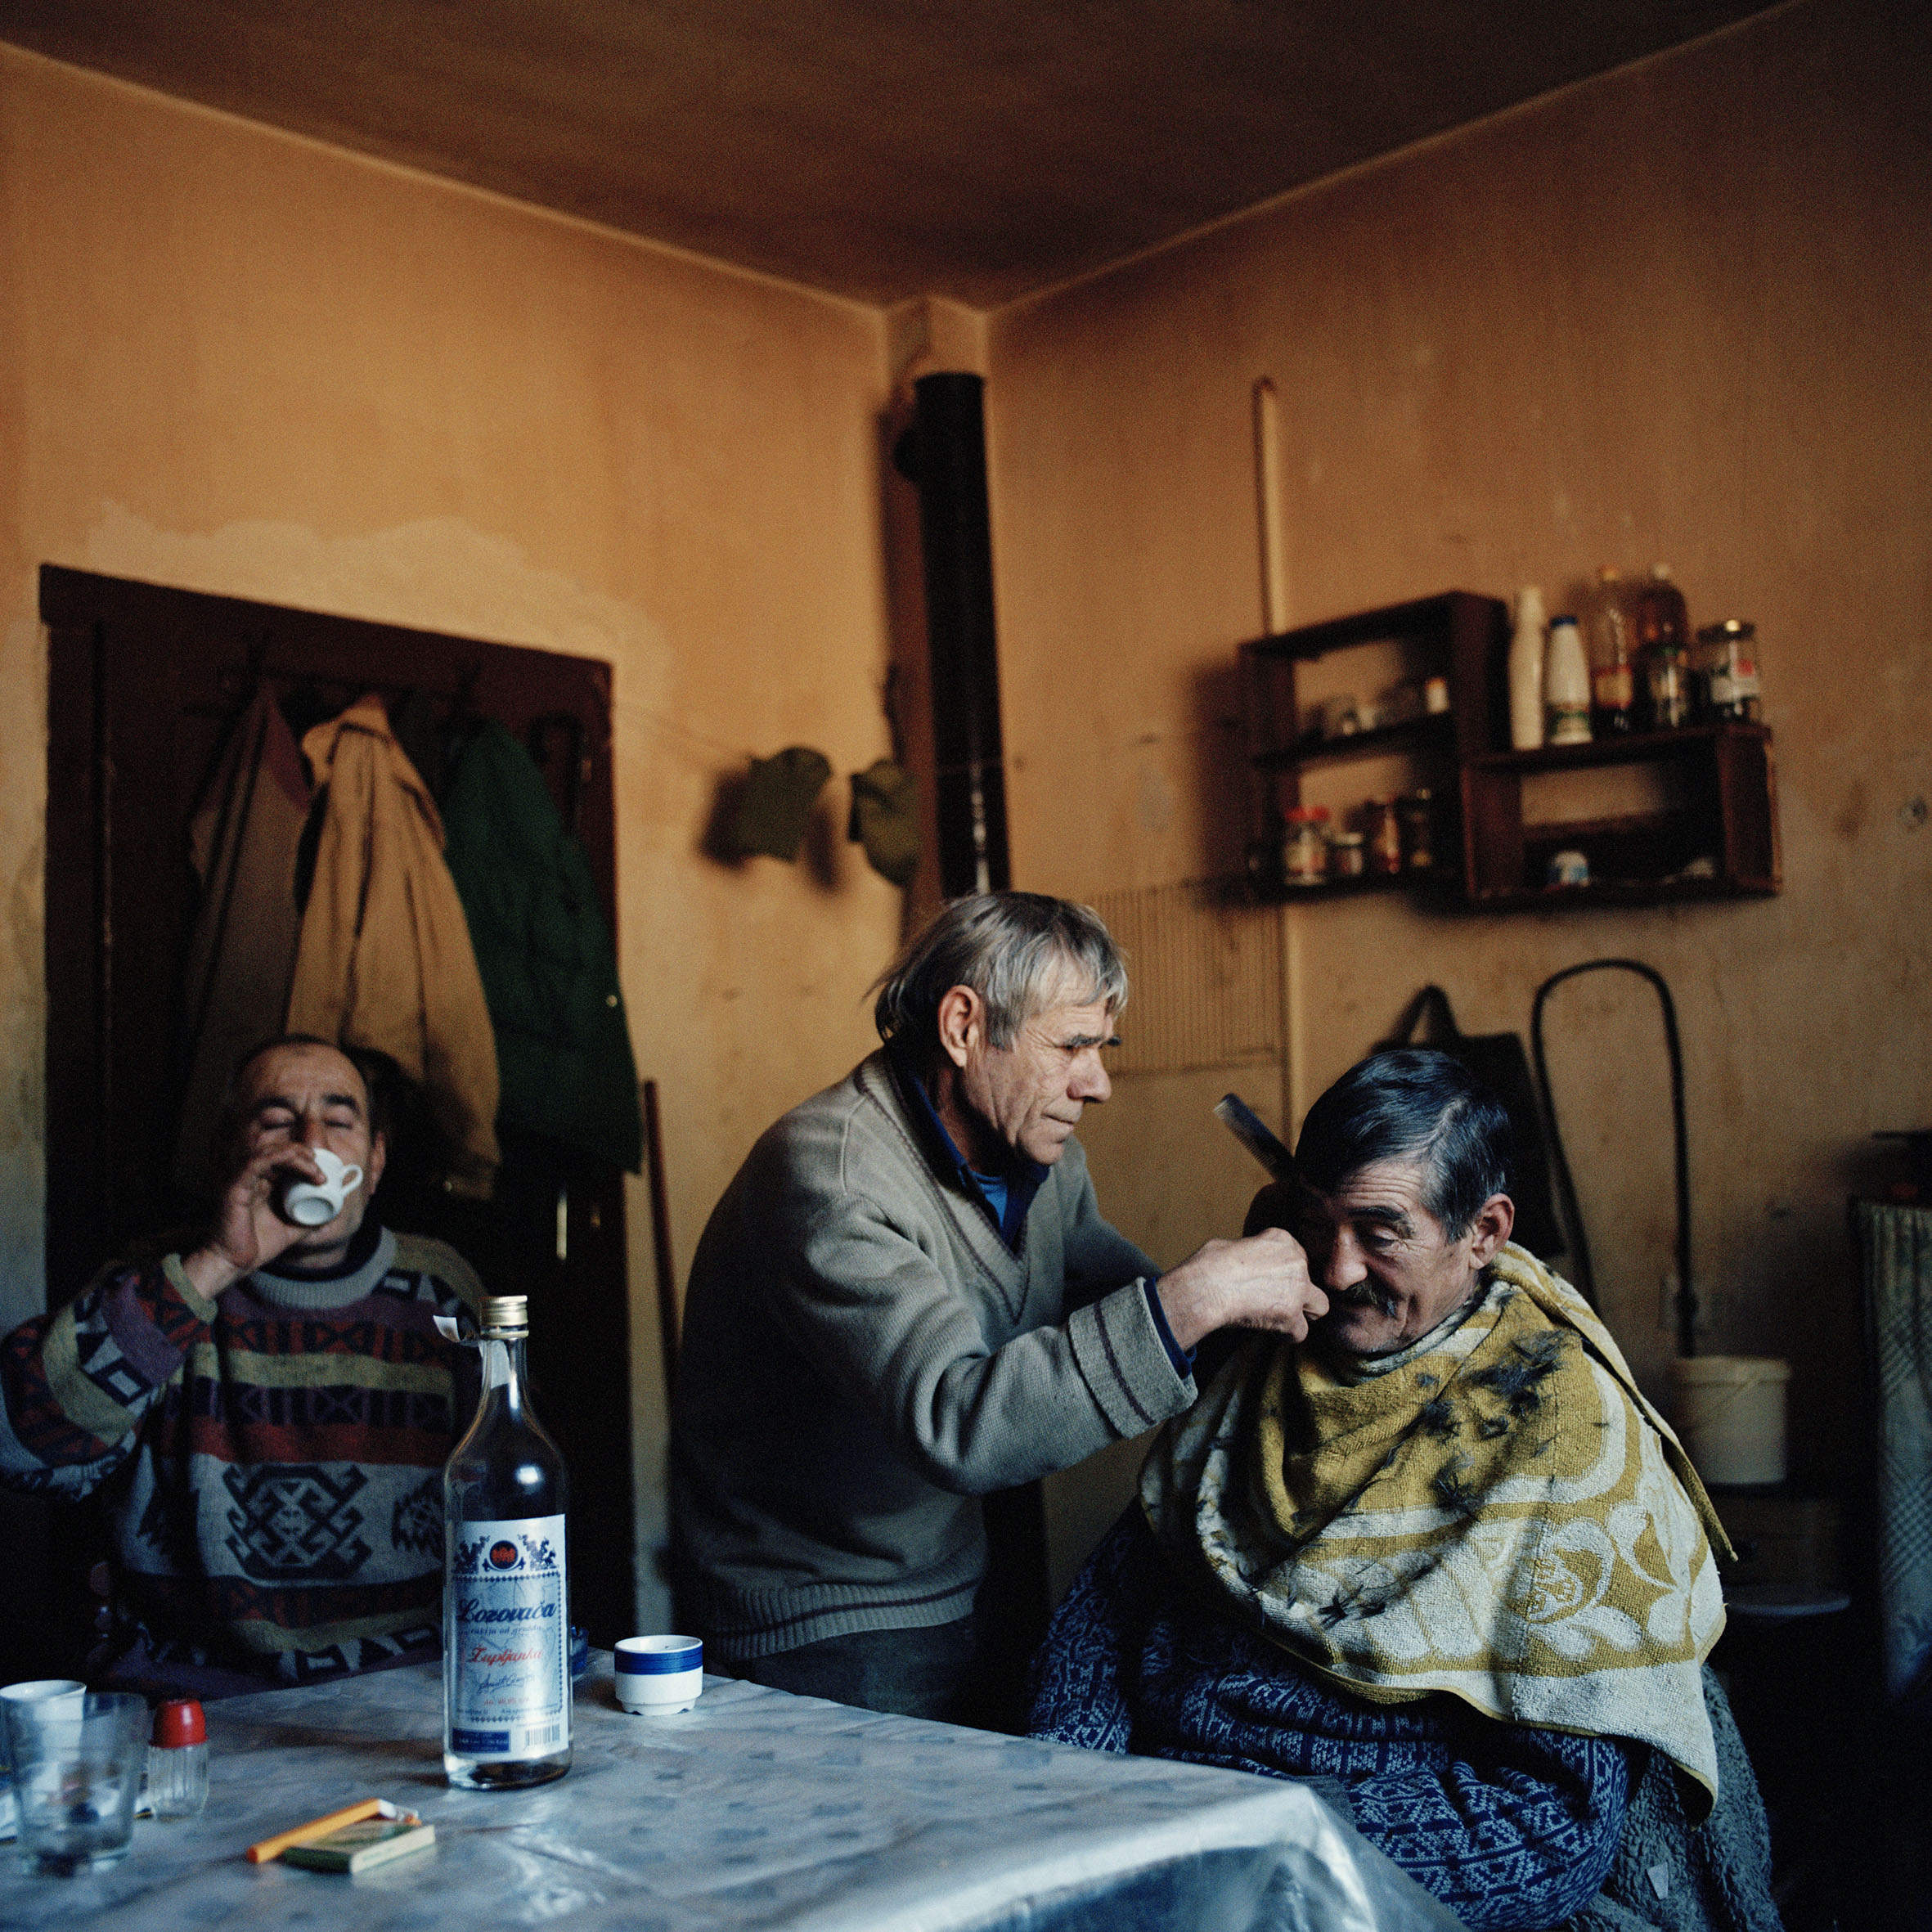  Sava Samardzija cuts the hair of his friend Slavolub Kristic while his brother Duro drinks brandy. The Samardzija brothers live as refugees in Rtanj collective centre in Serbia since fleeing their home in Croatia in 1995.   